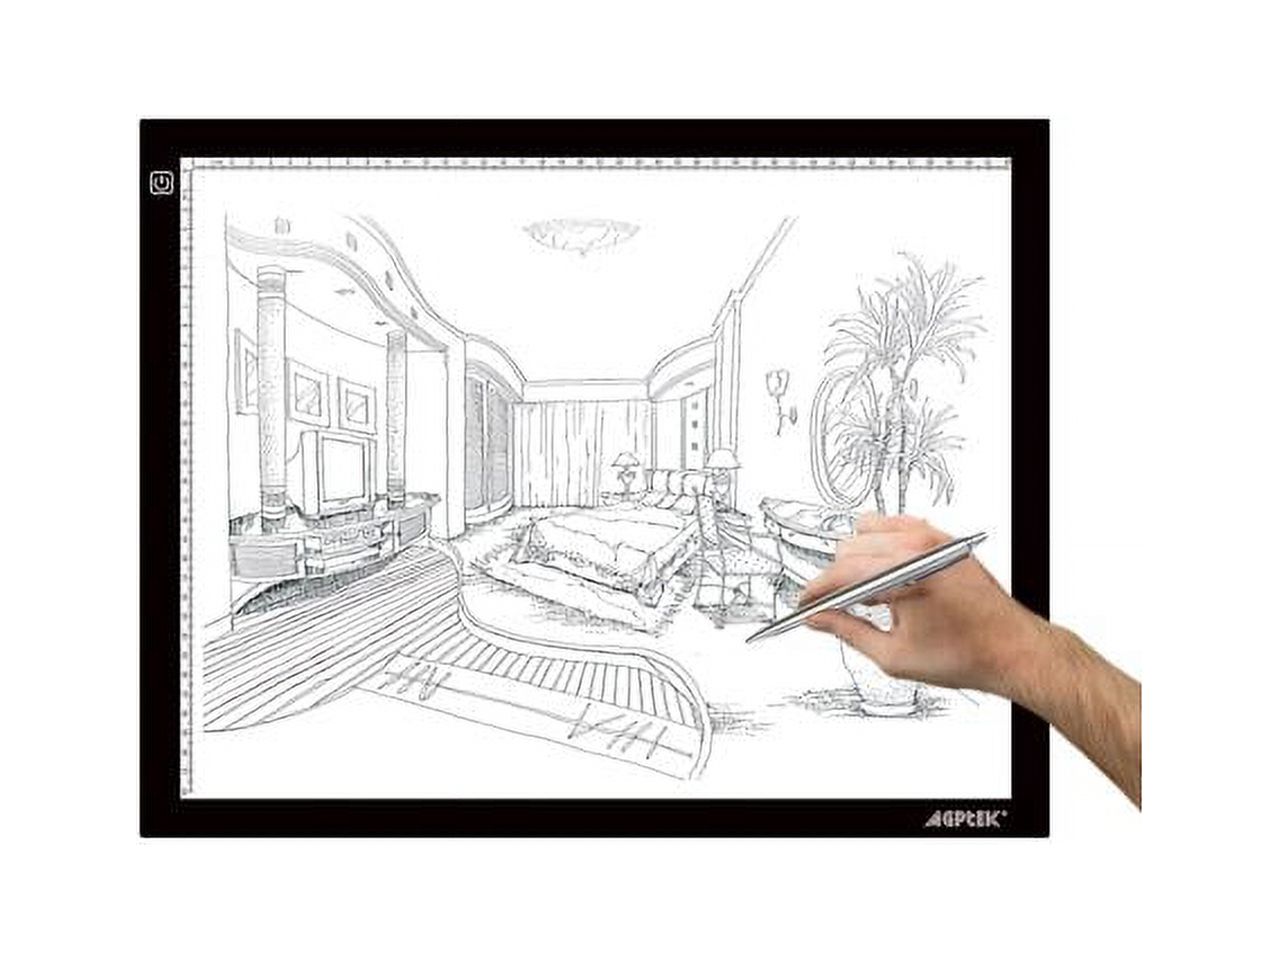 Ultra-thin A3 LED Super Bright Animation Drawing Tracing Board Light Table/Light Box Tattoo Tracing Board - image 1 of 6